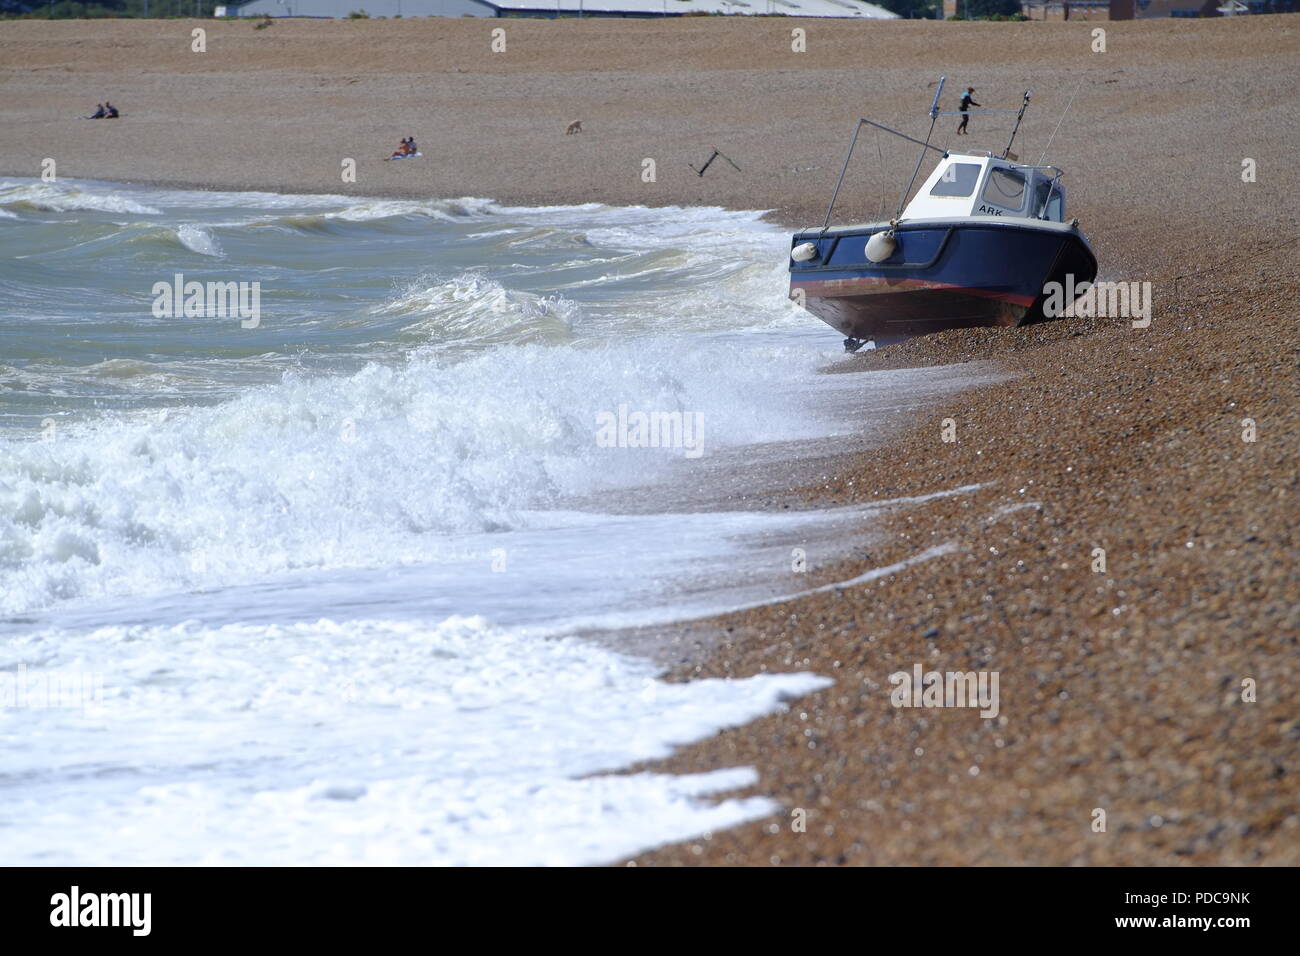 https://c8.alamy.com/comp/PDC9NK/seaford-east-sussex-uk-fishing-boat-washes-up-on-seaford-beach-after-strong-winds-PDC9NK.jpg